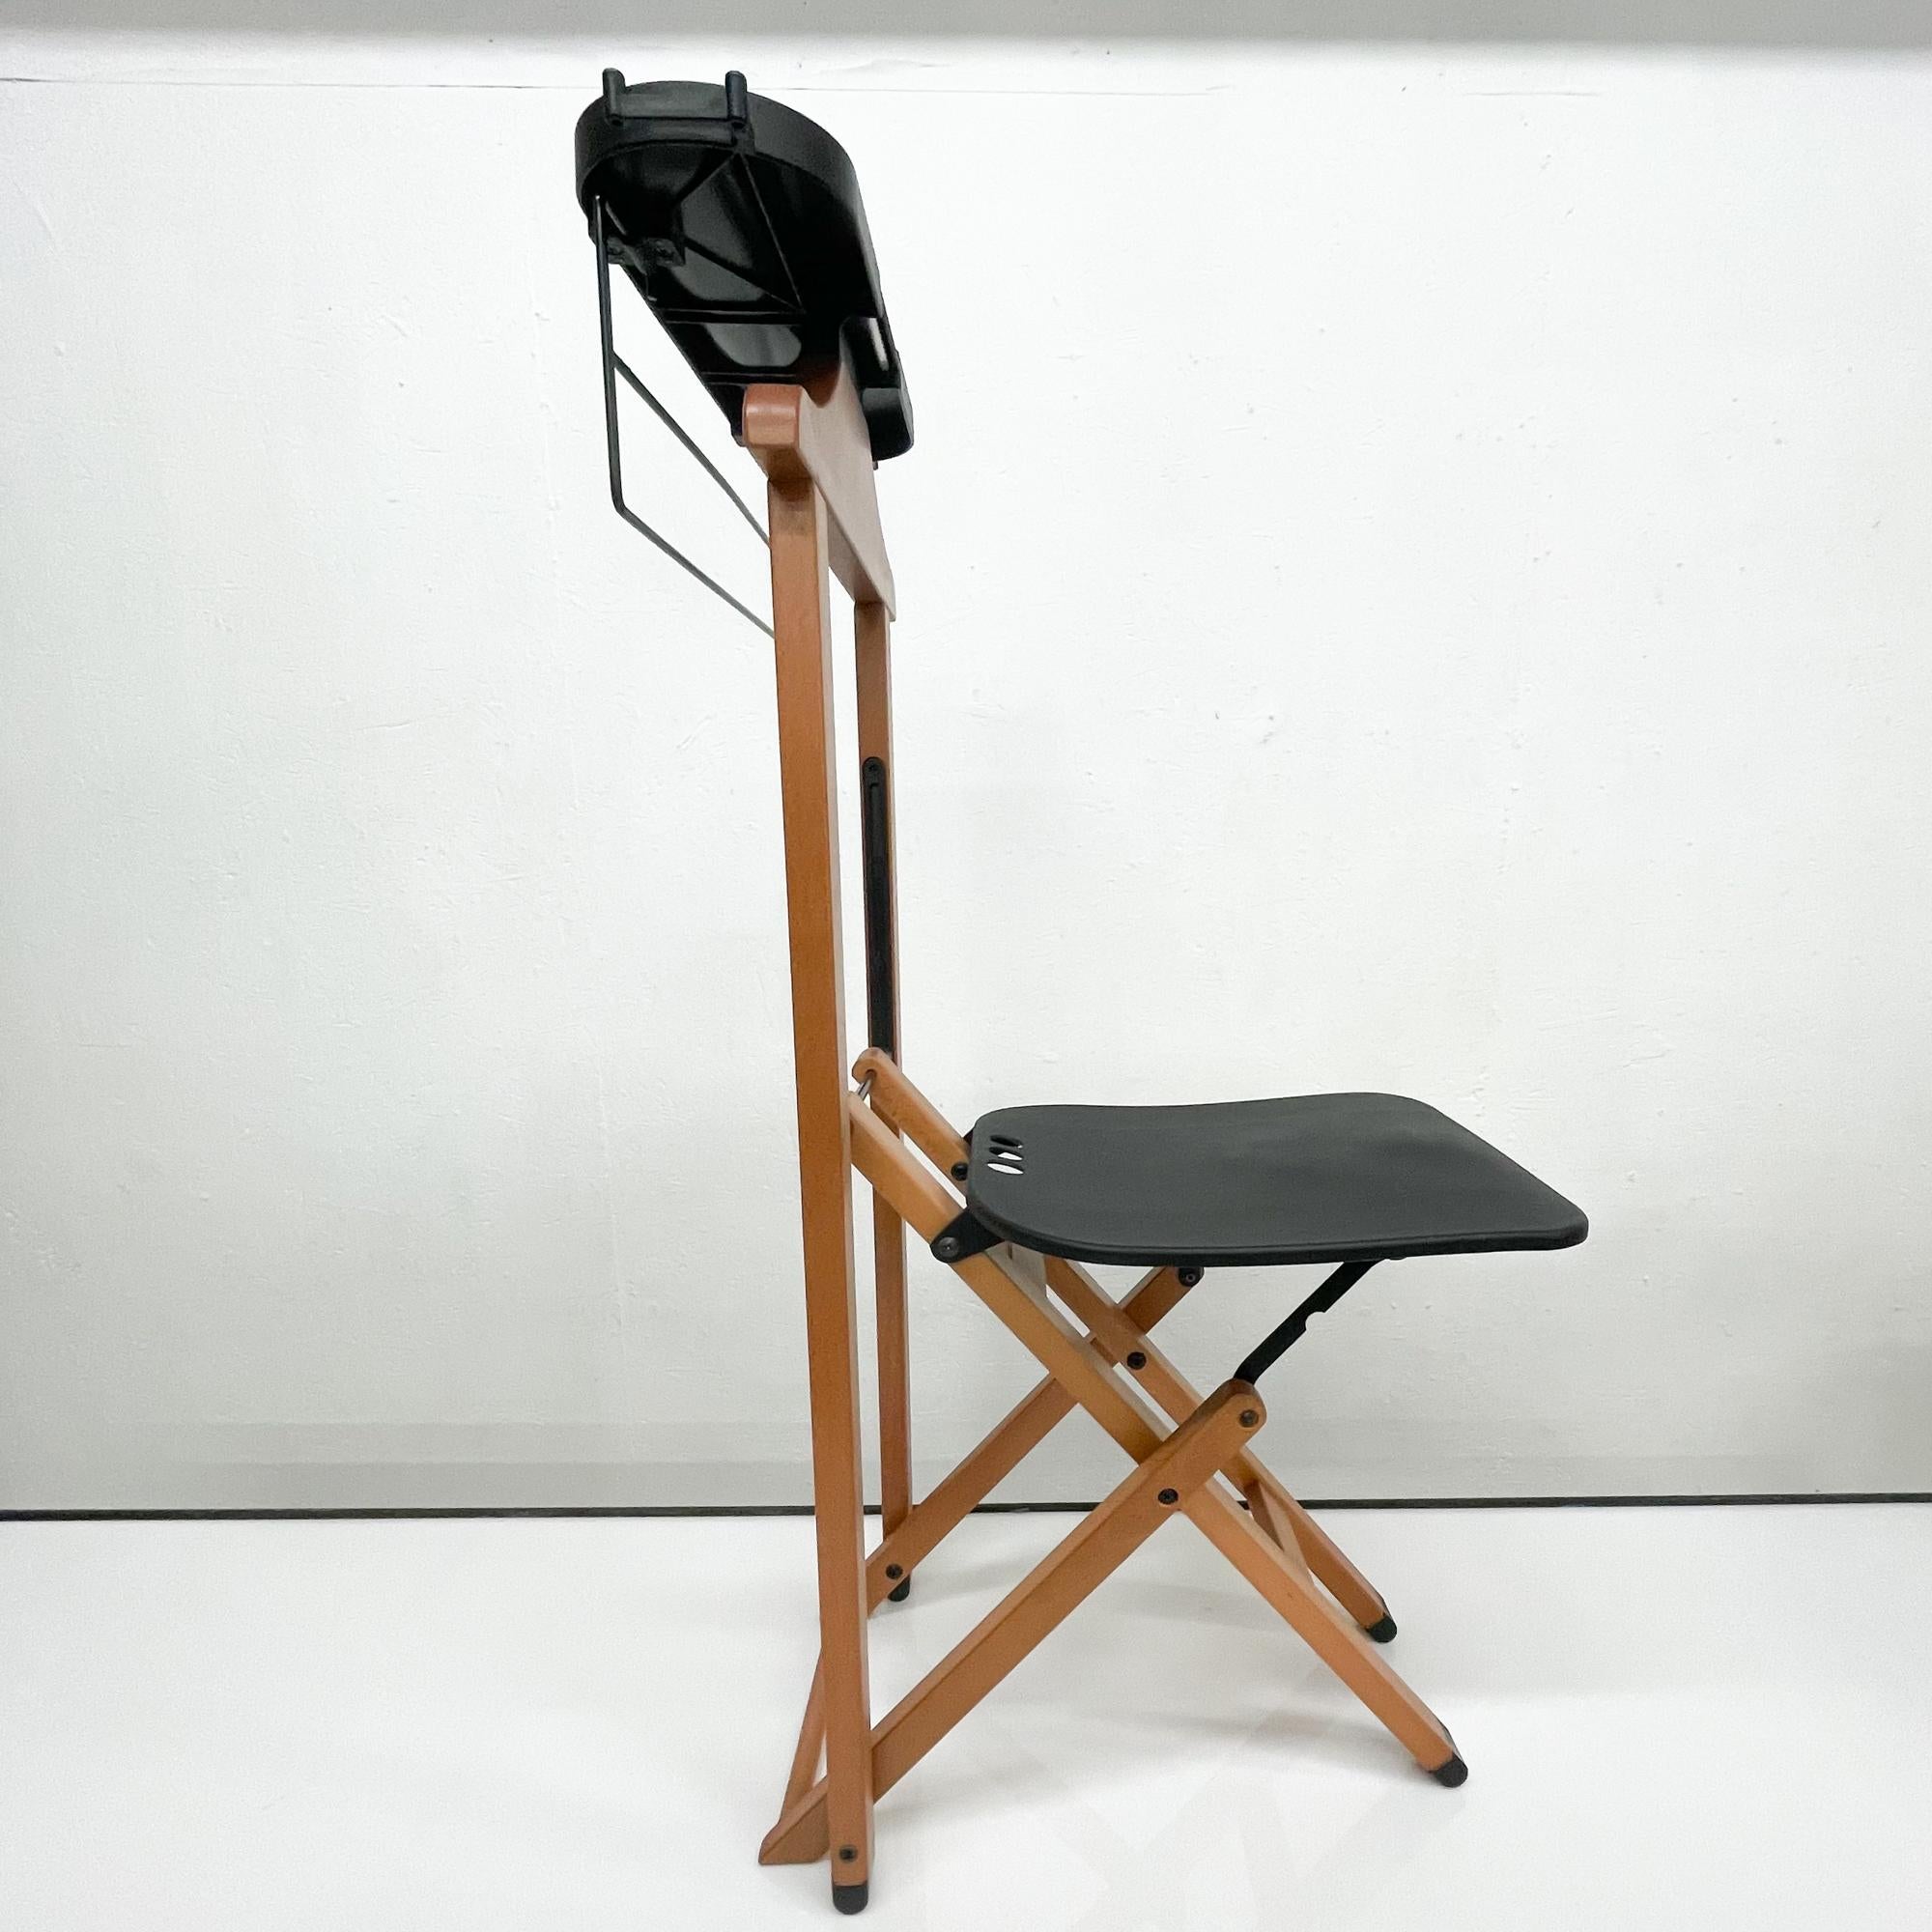 Italian 1990s Foppapedretti Gentleman's Suit Chair Folding Valet Stand Italy